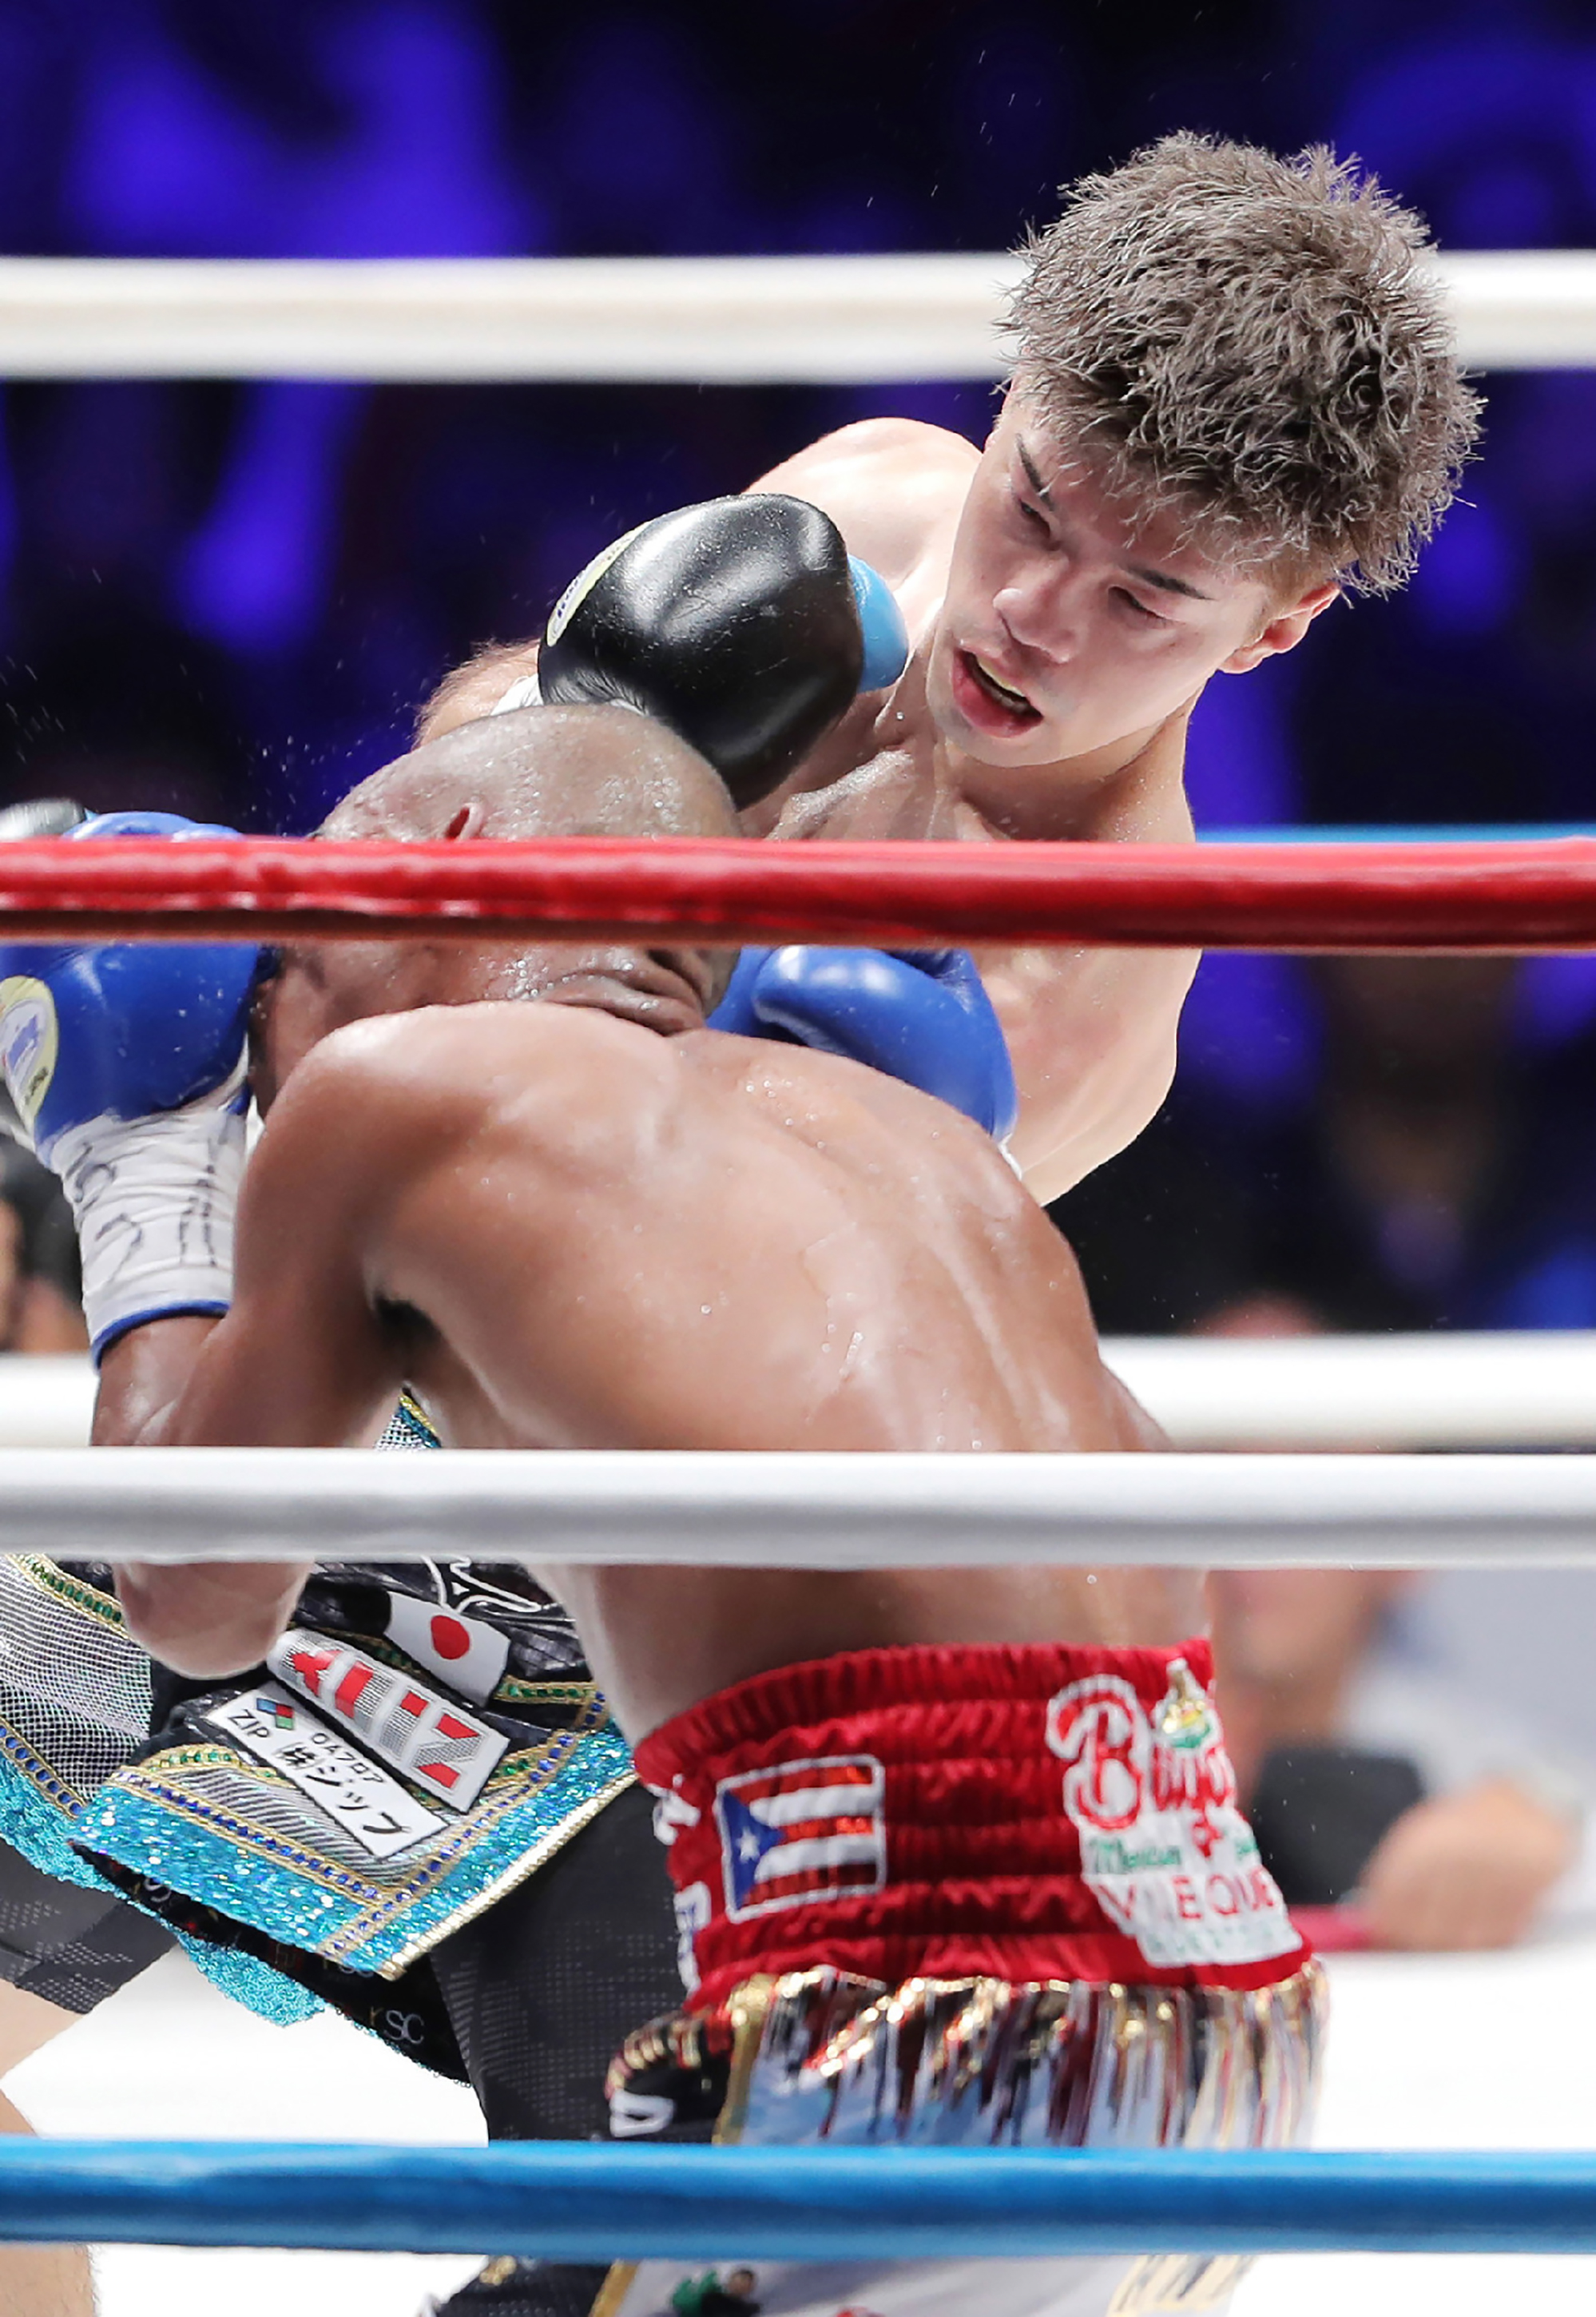 Japan’s Kosei Tanaka (top) fights against Puerto Rico’s Jonathan Gonzalez (bottom) during their WBO flyweight title boxing match in Nagoya on August 24, 2019.